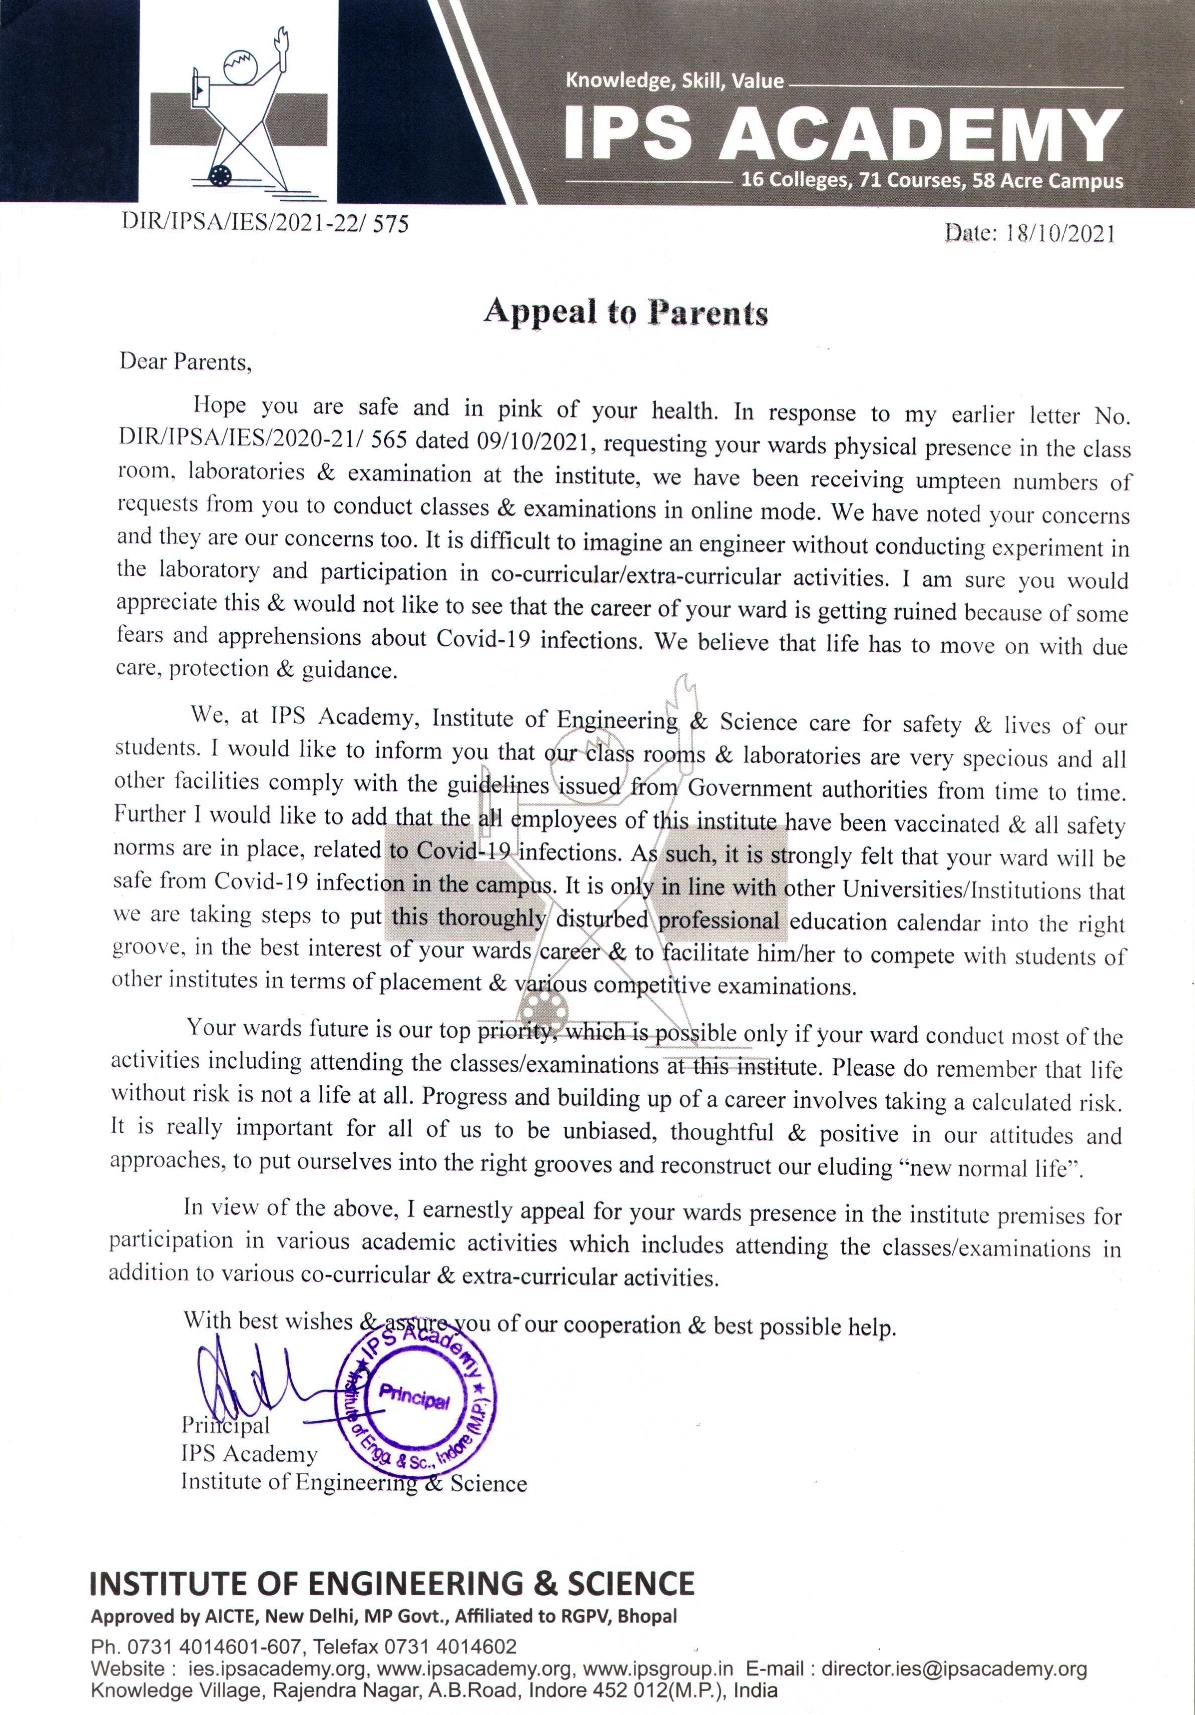 Appeal to Parents_001